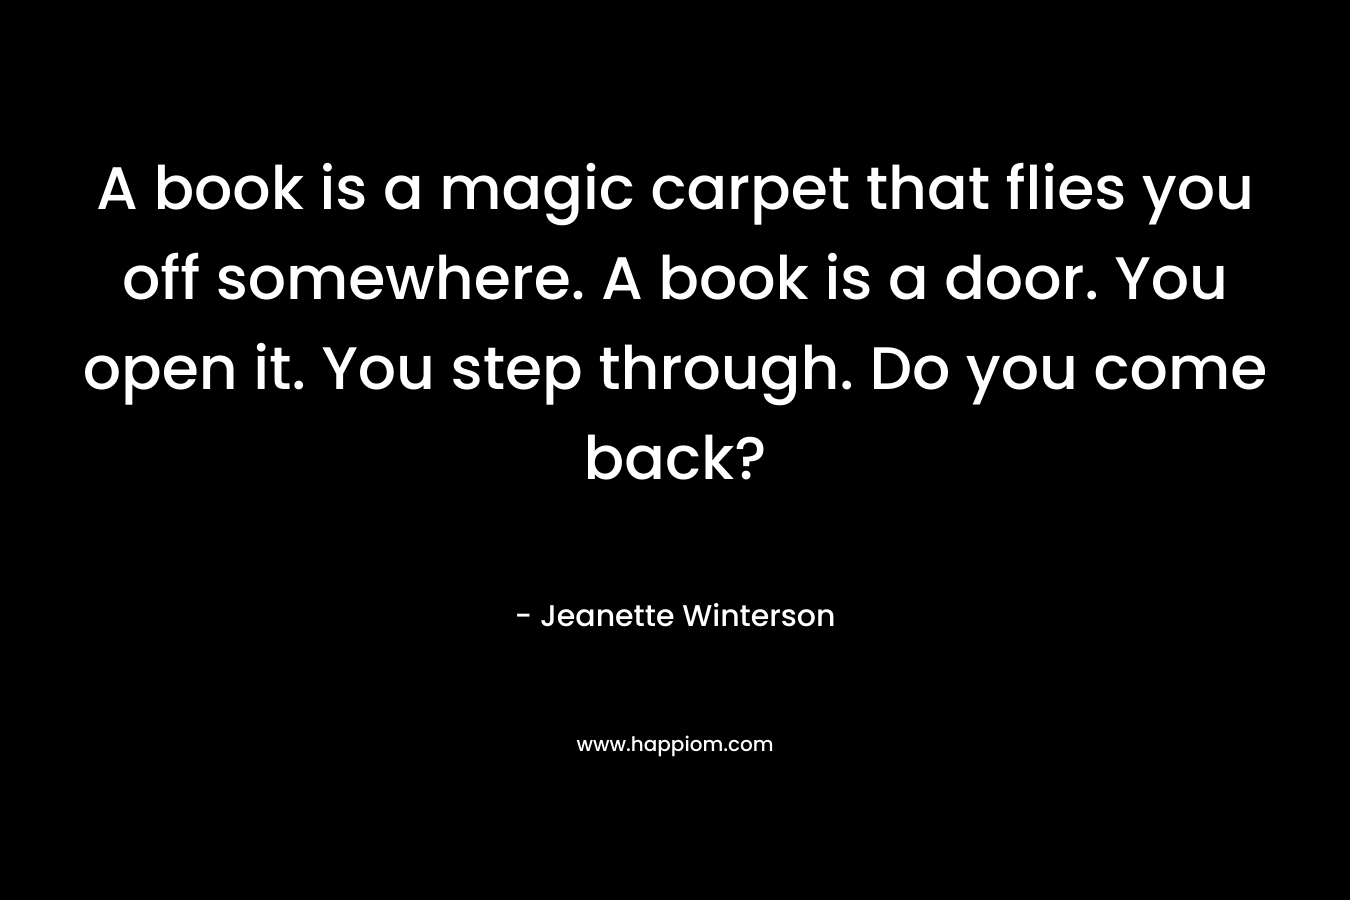 A book is a magic carpet that flies you off somewhere. A book is a door. You open it. You step through. Do you come back?